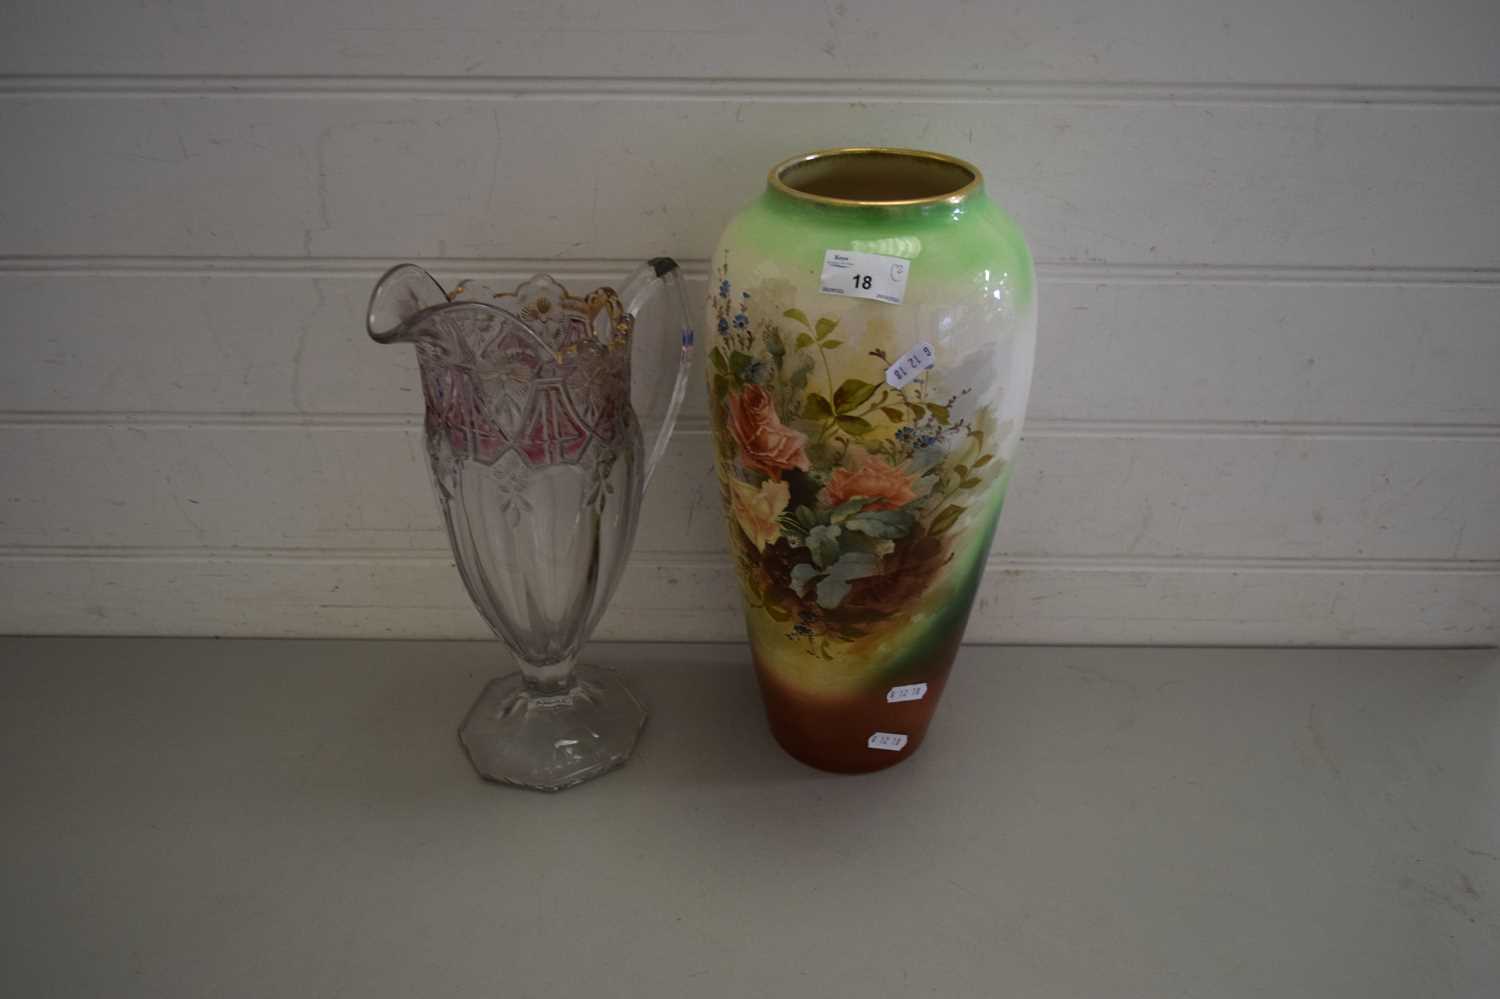 FLORAL DECORATED VASE AND A FURTHER LARGE GLASS JUG